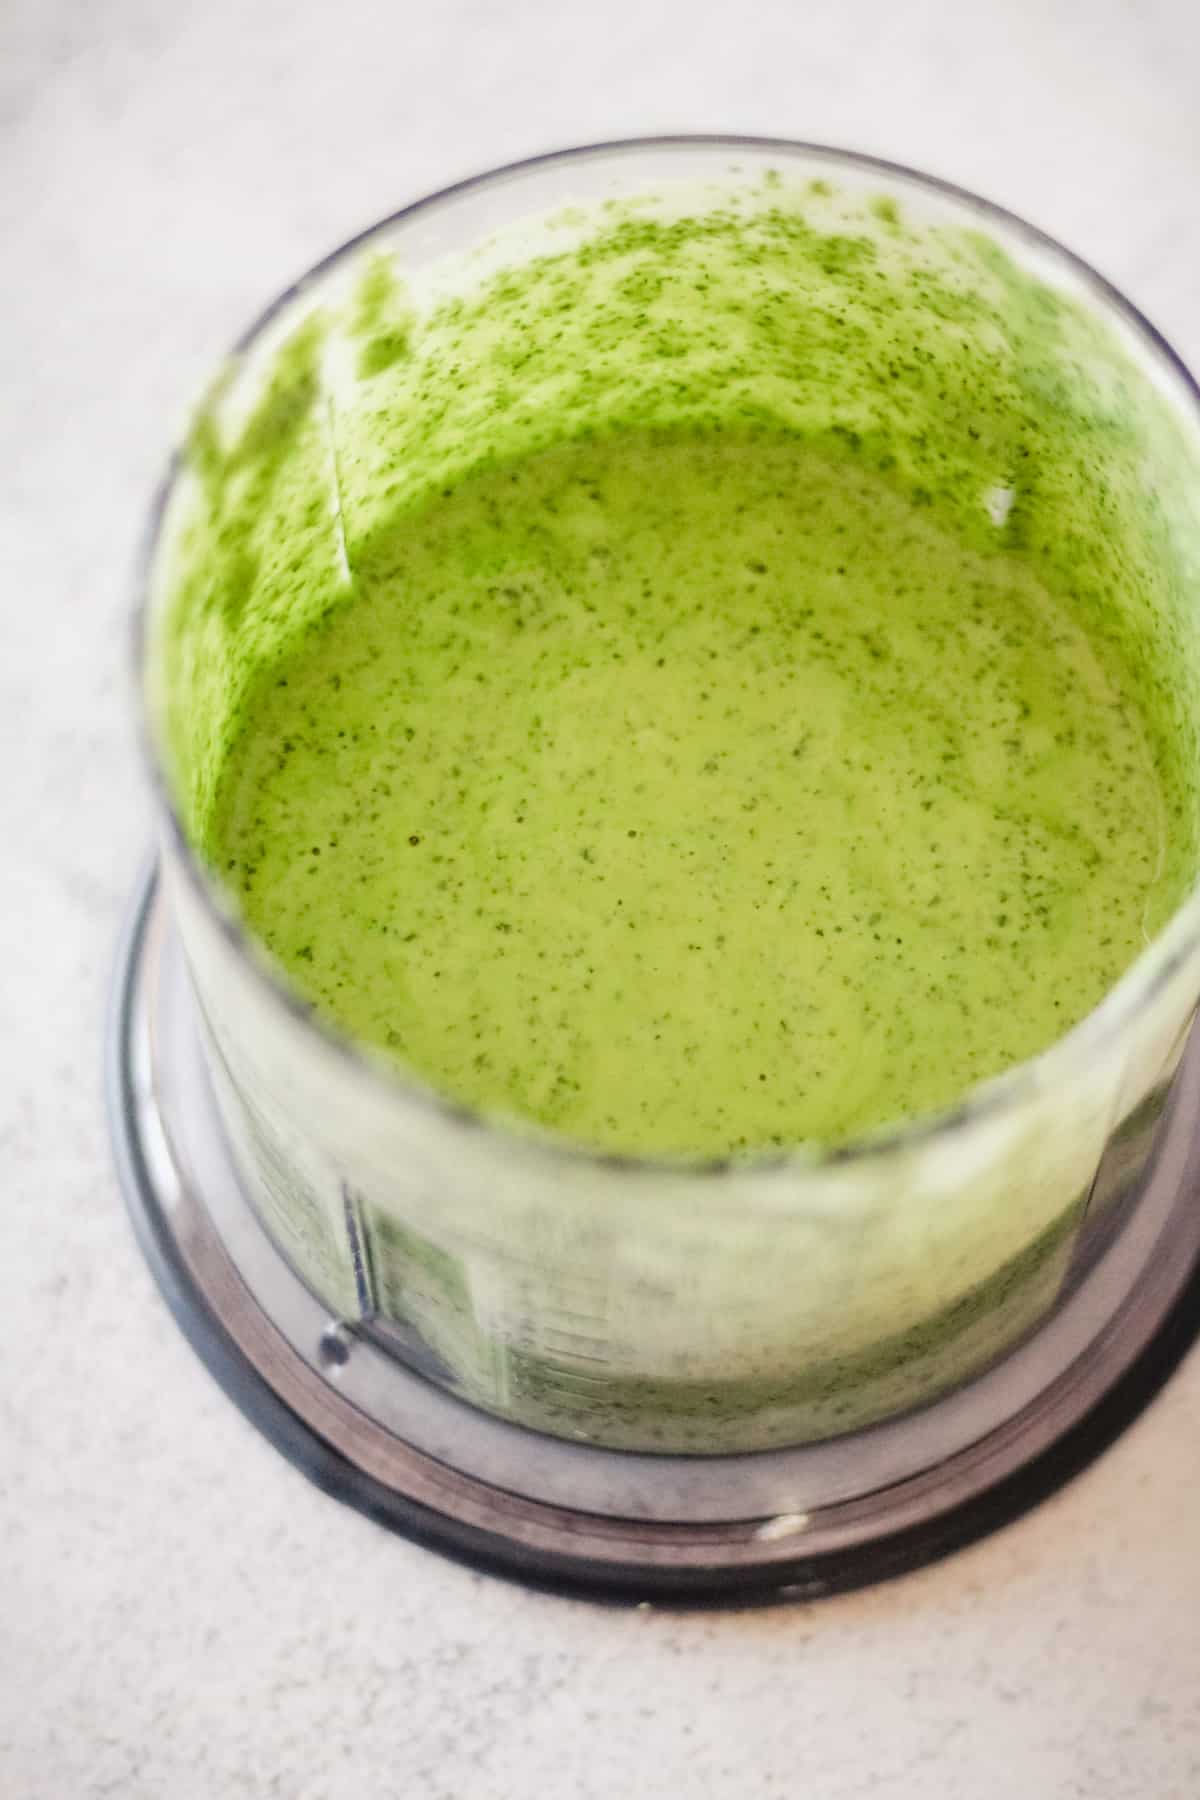 Process the shot with the mixed green goddess dressing in a food processor.